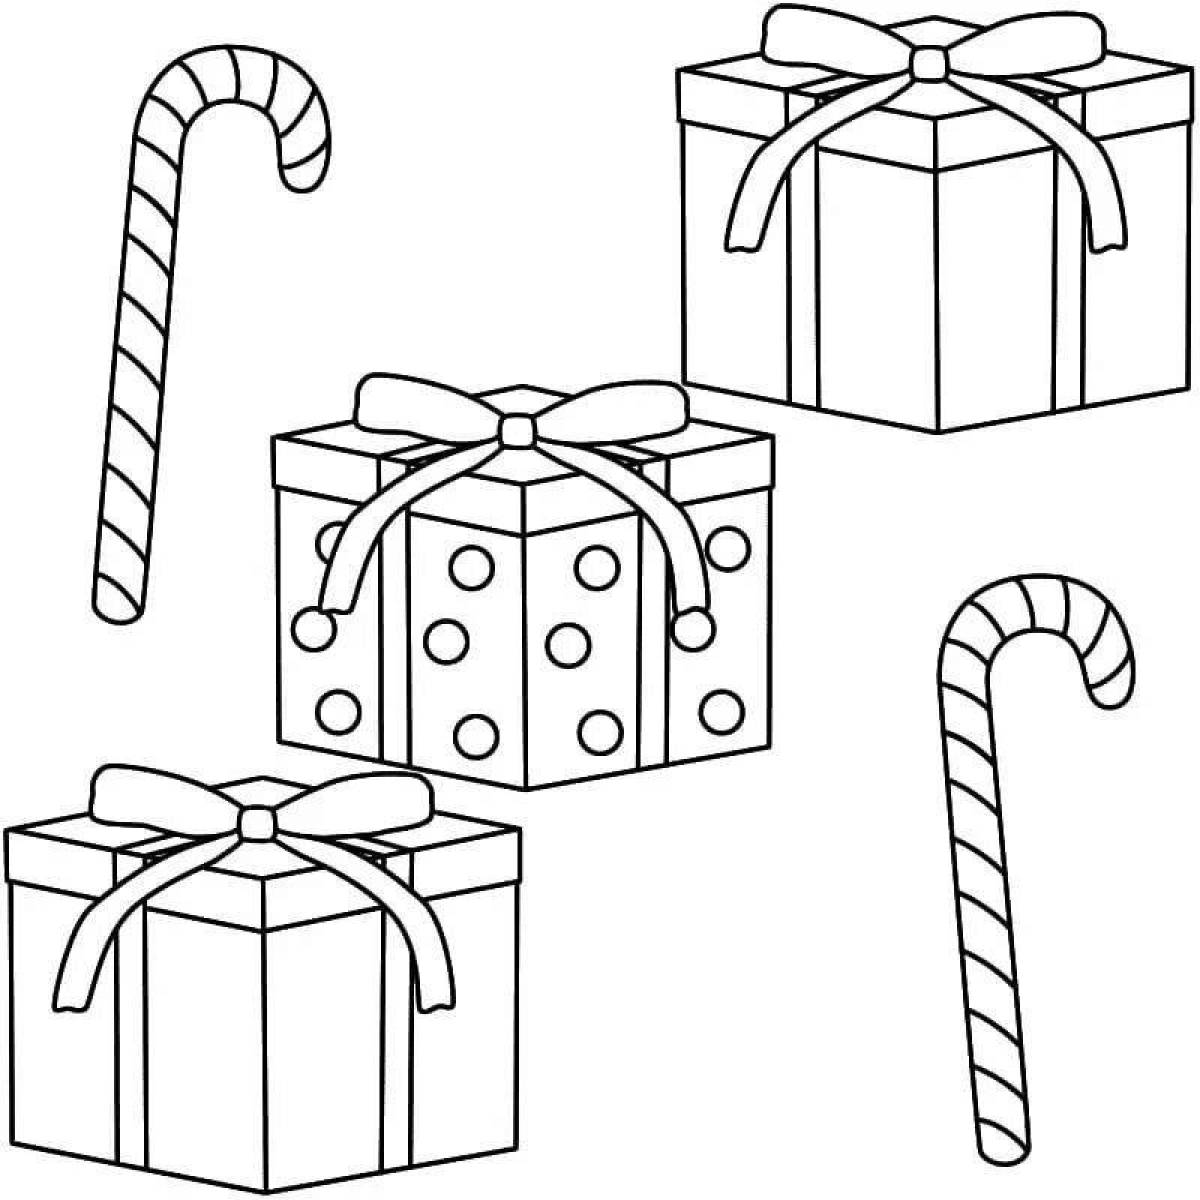 Tempting gift box coloring page